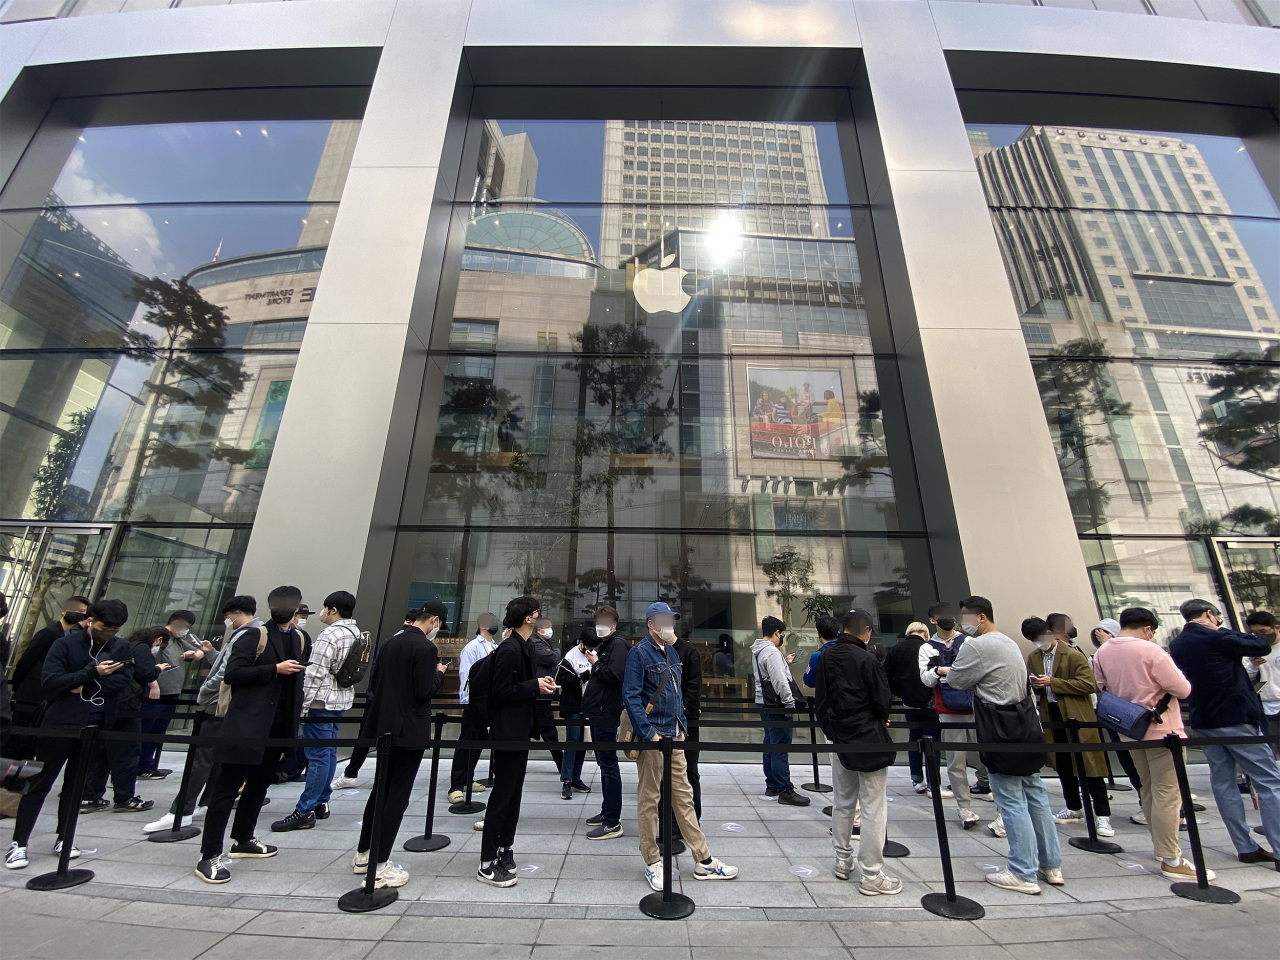 Customers wait in line at the Apple Store in Myeong-dong, Seoul, Saturday. (Yonhap)